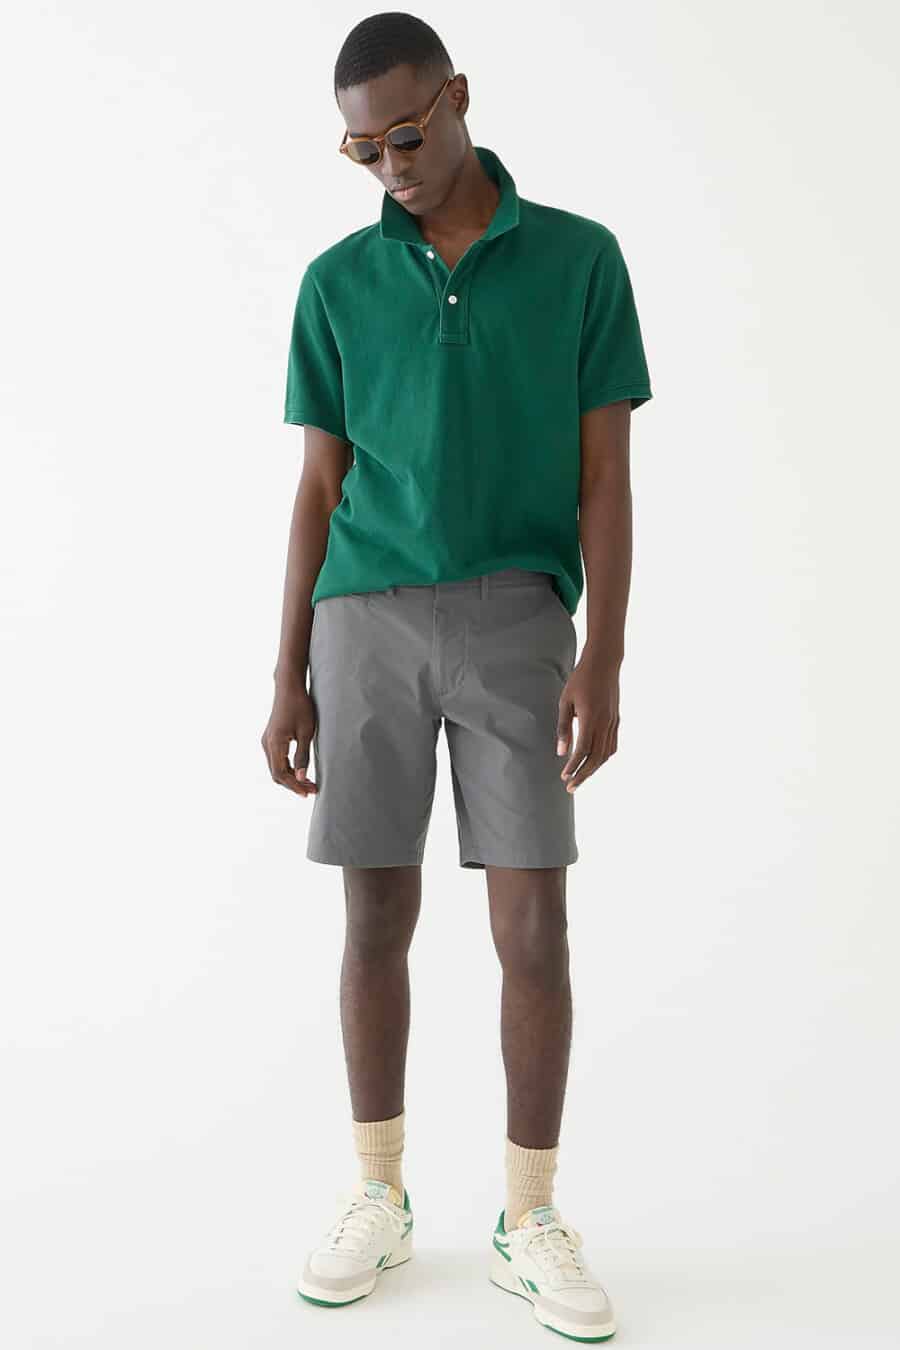 Men's dark grey shorts, forest green polo shirt, beige socks and off-white/green retro running sneakers outfit